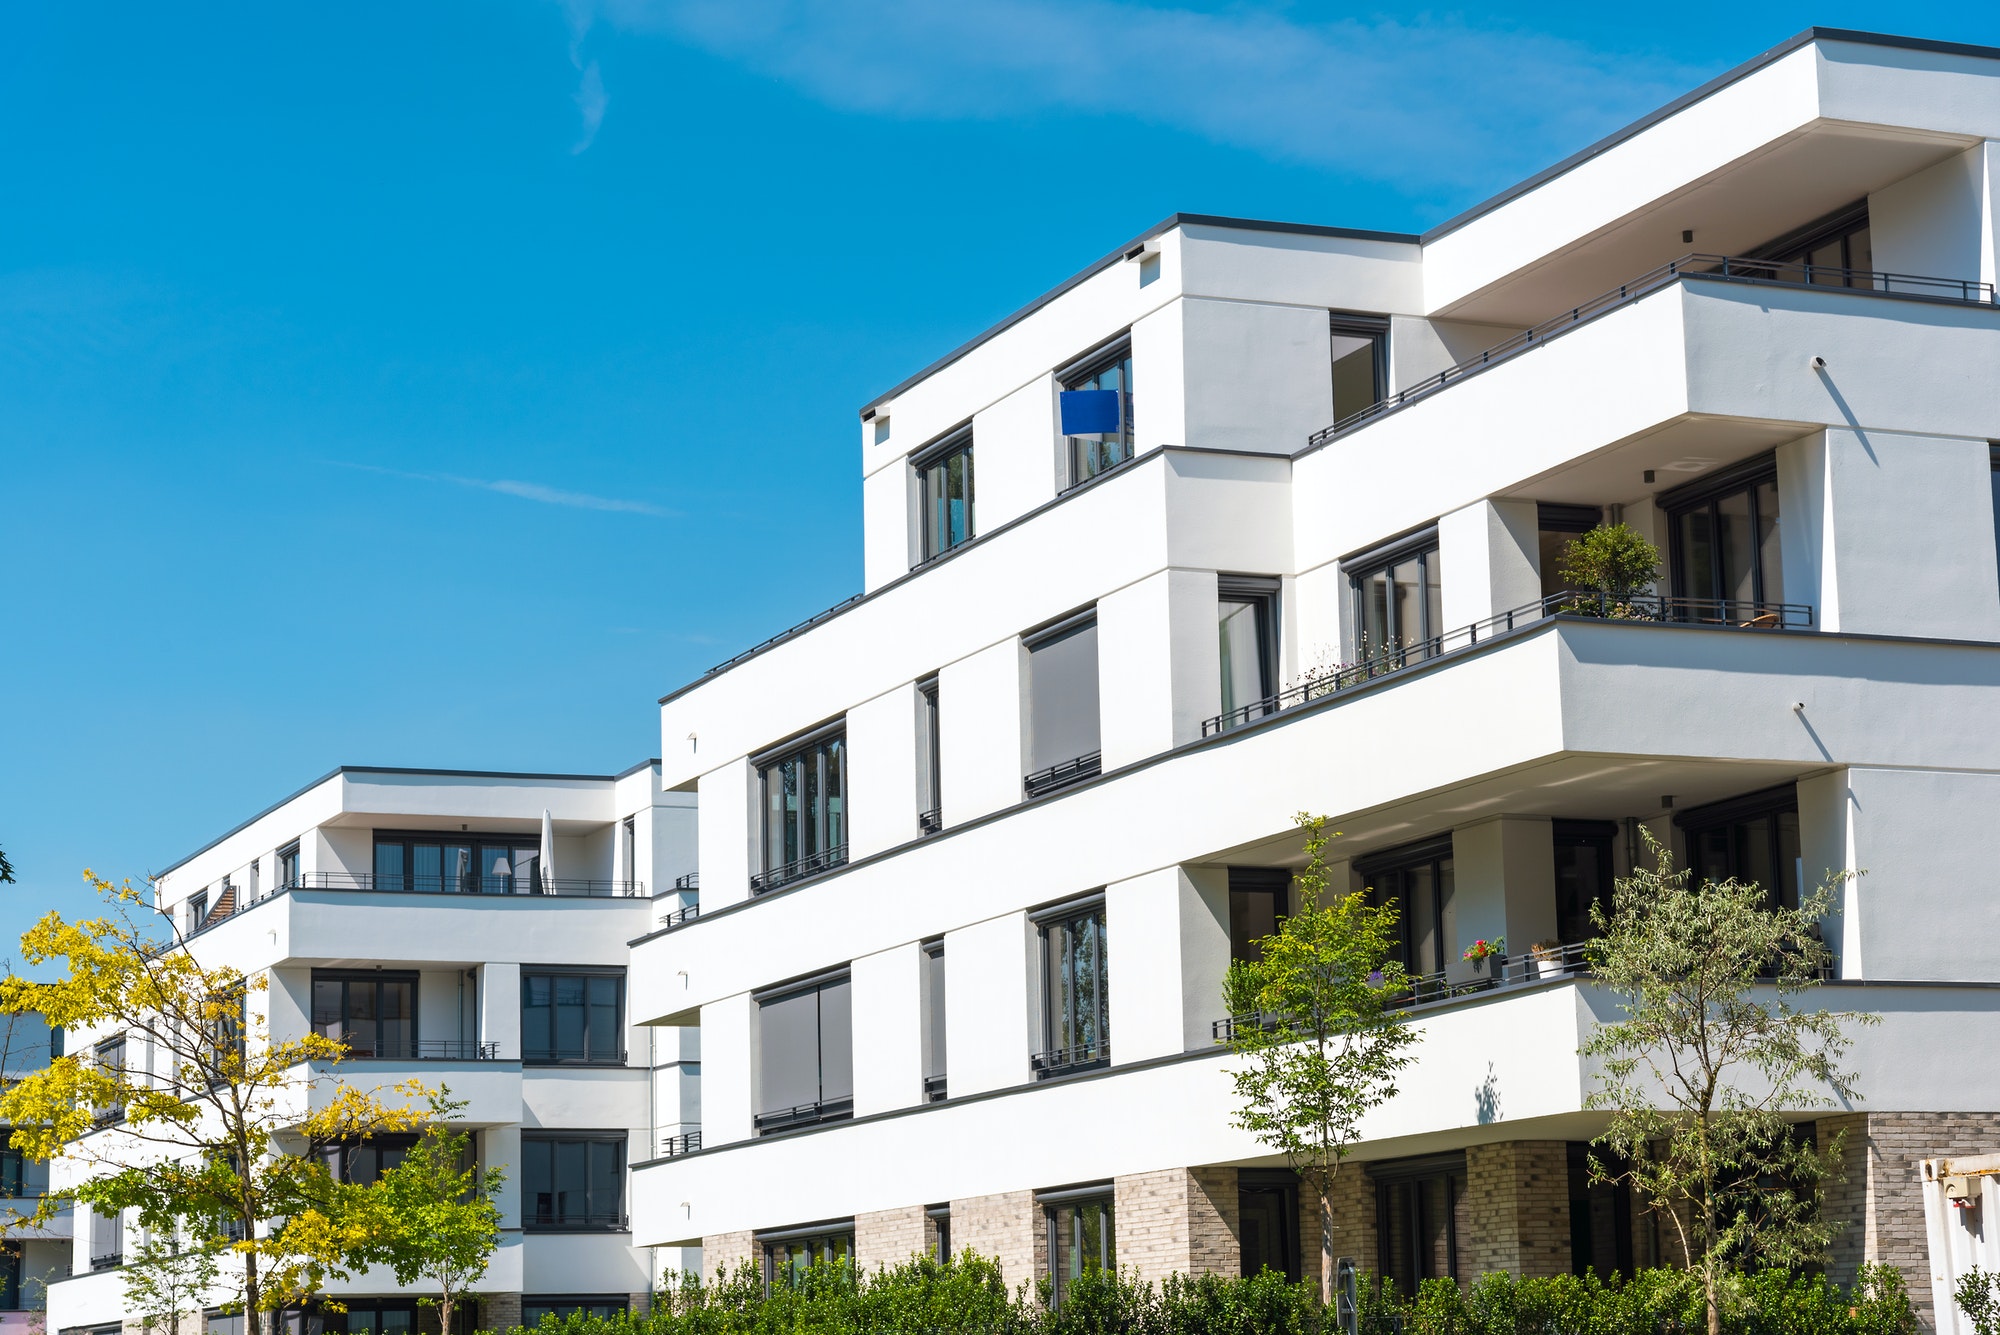 White modern townhouses in Germany